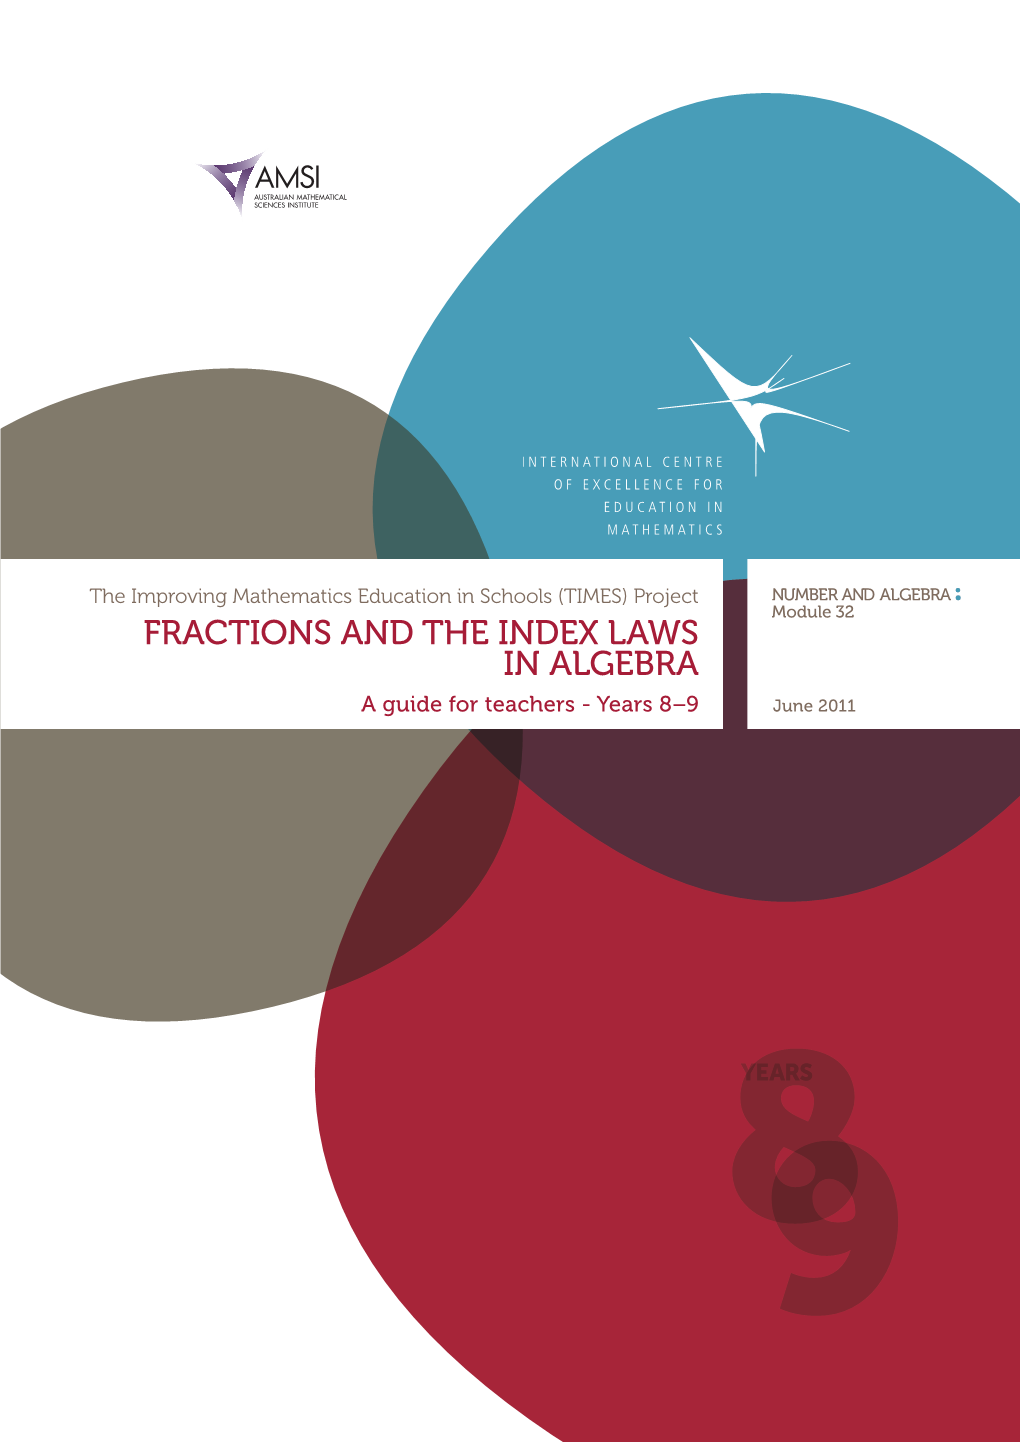 Fractions and the Index Laws in Algebra